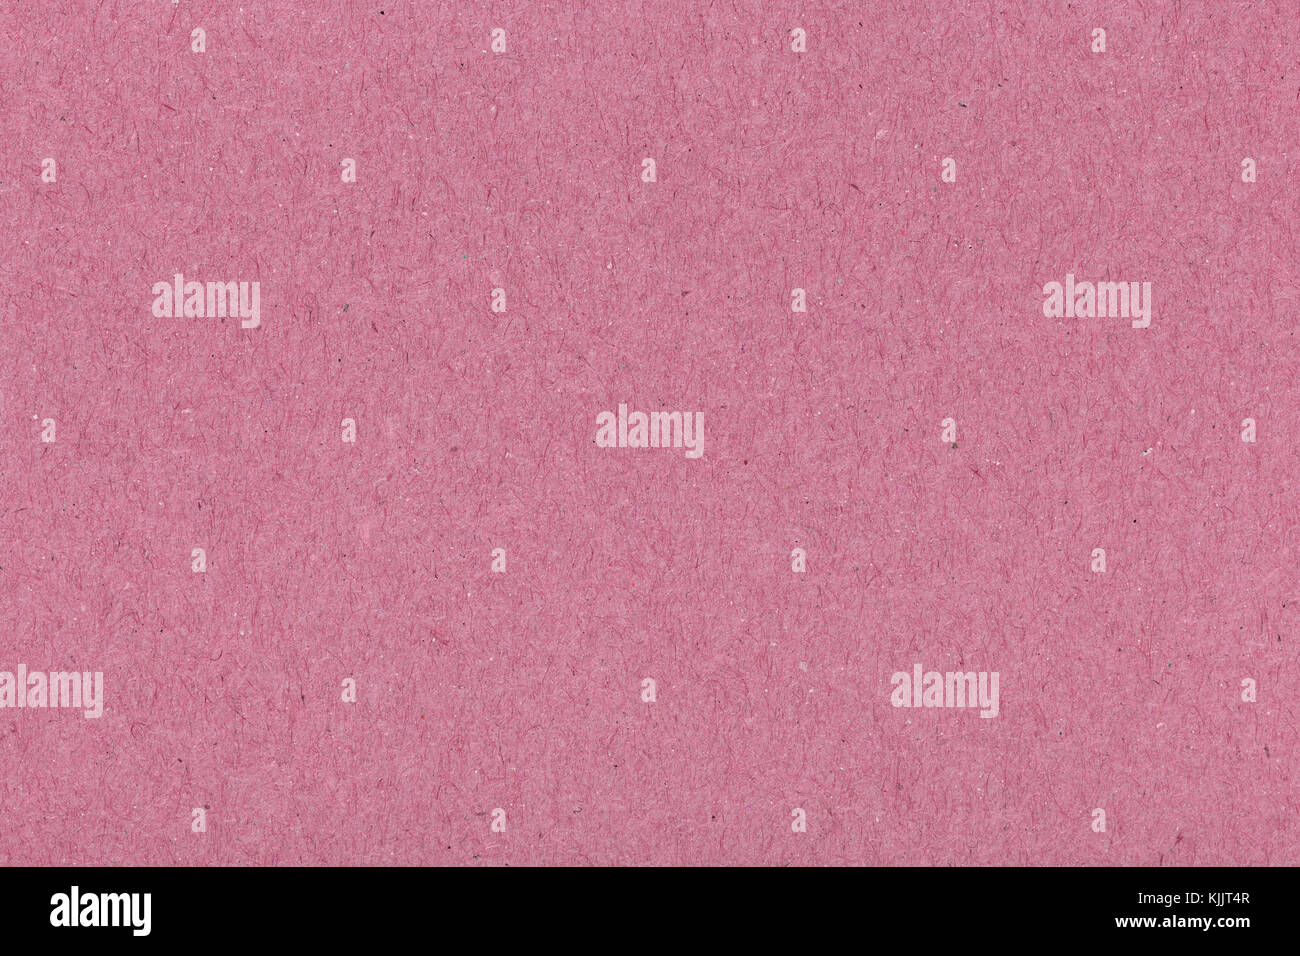 natural pink recycled paper texture background Stock Photo